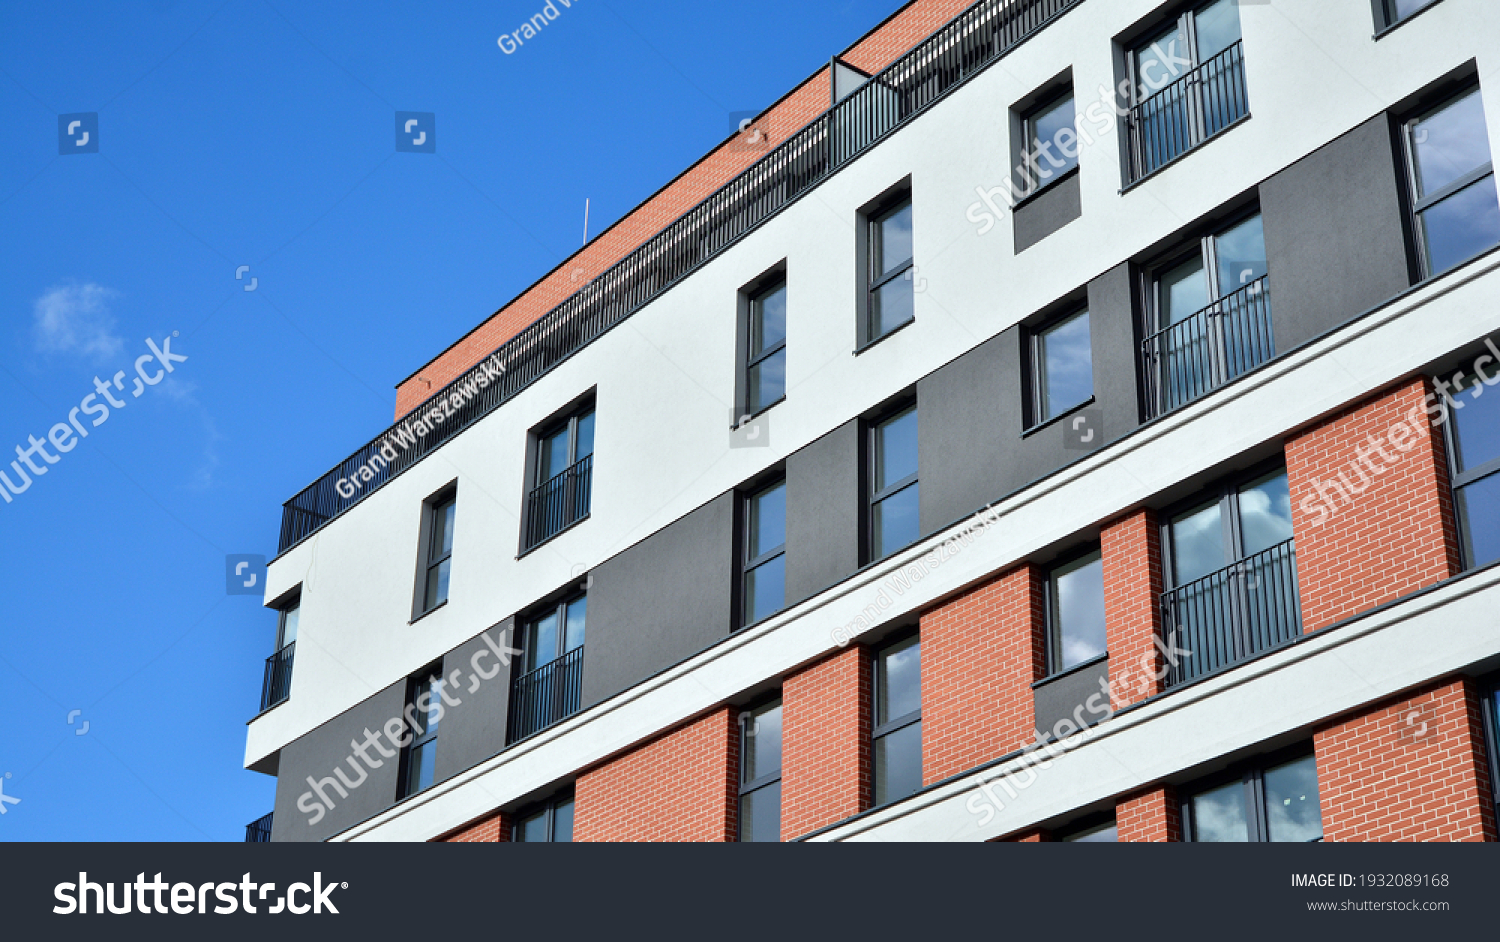 Cityscape with facade of a modern residential building. Modern European residential apartment building. #1932089168